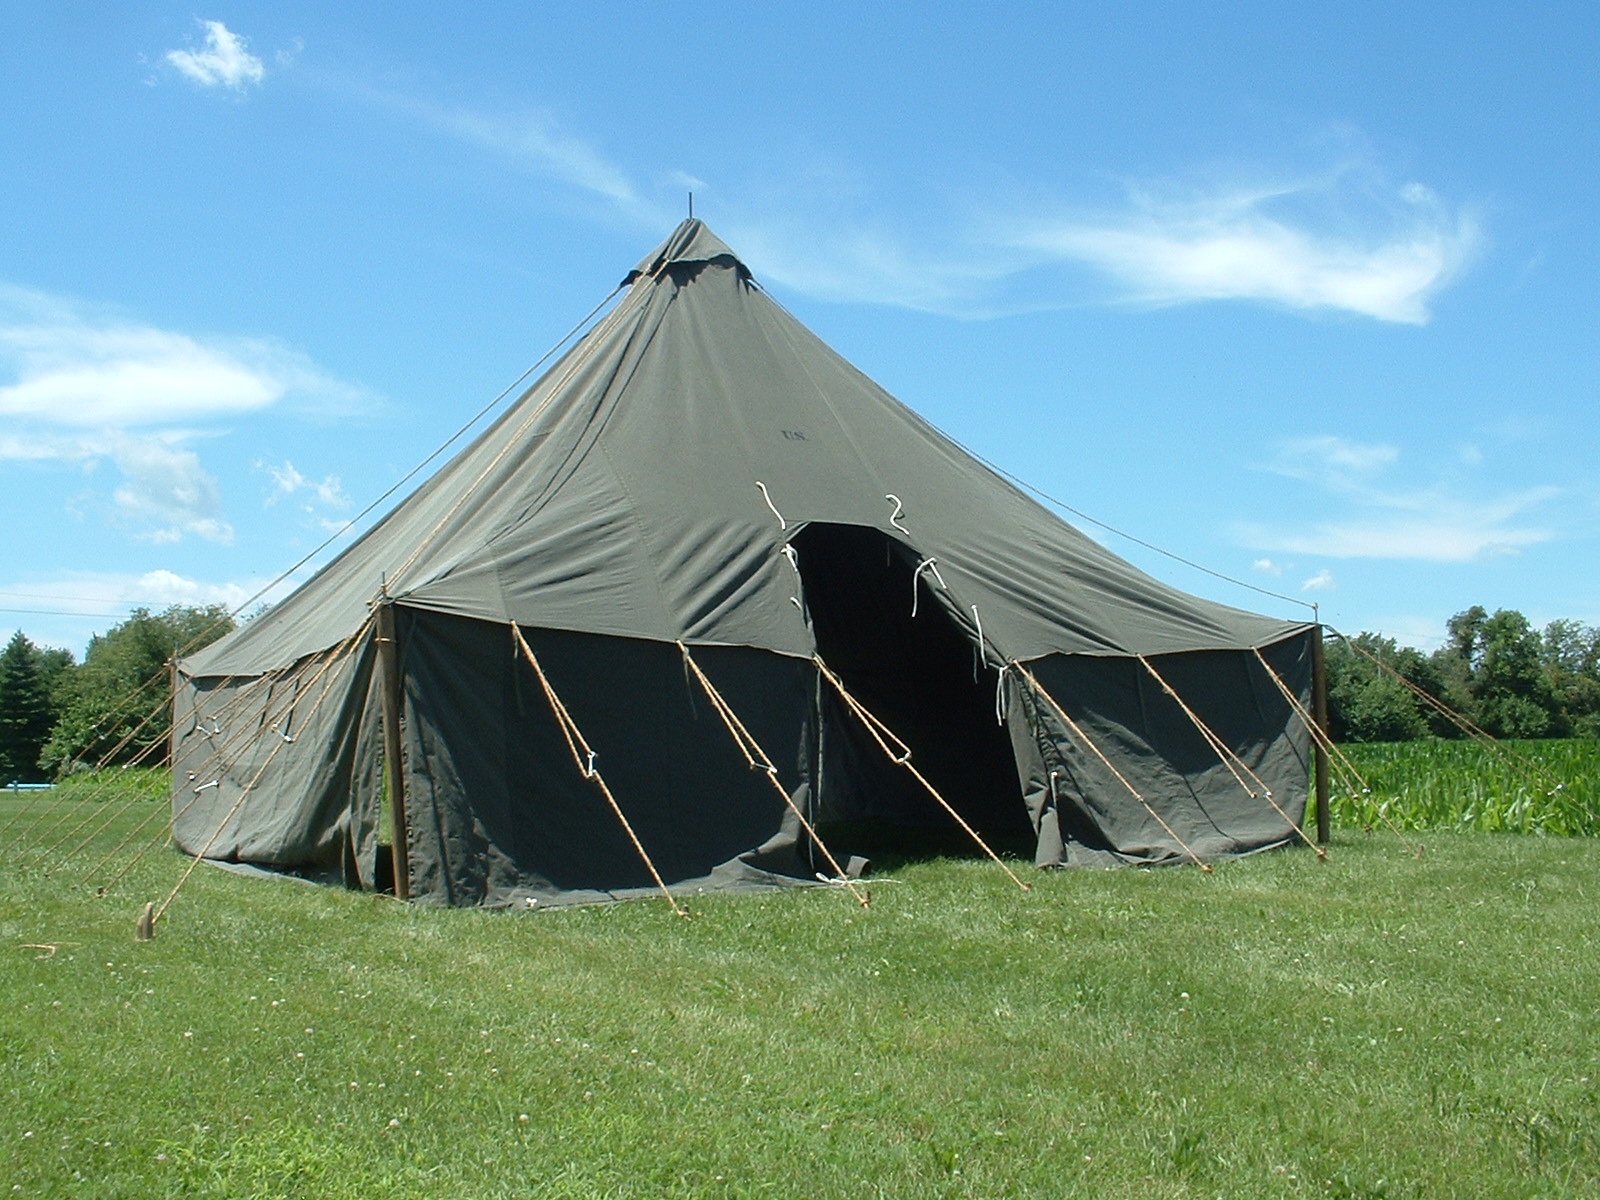 Armbruster's World War II (WWII) 1934 Pyramidal Tent, (Tent, Fire-Resistant, Pyramidal, M-1934, Olive Drab, Stock No. 24-T-320)